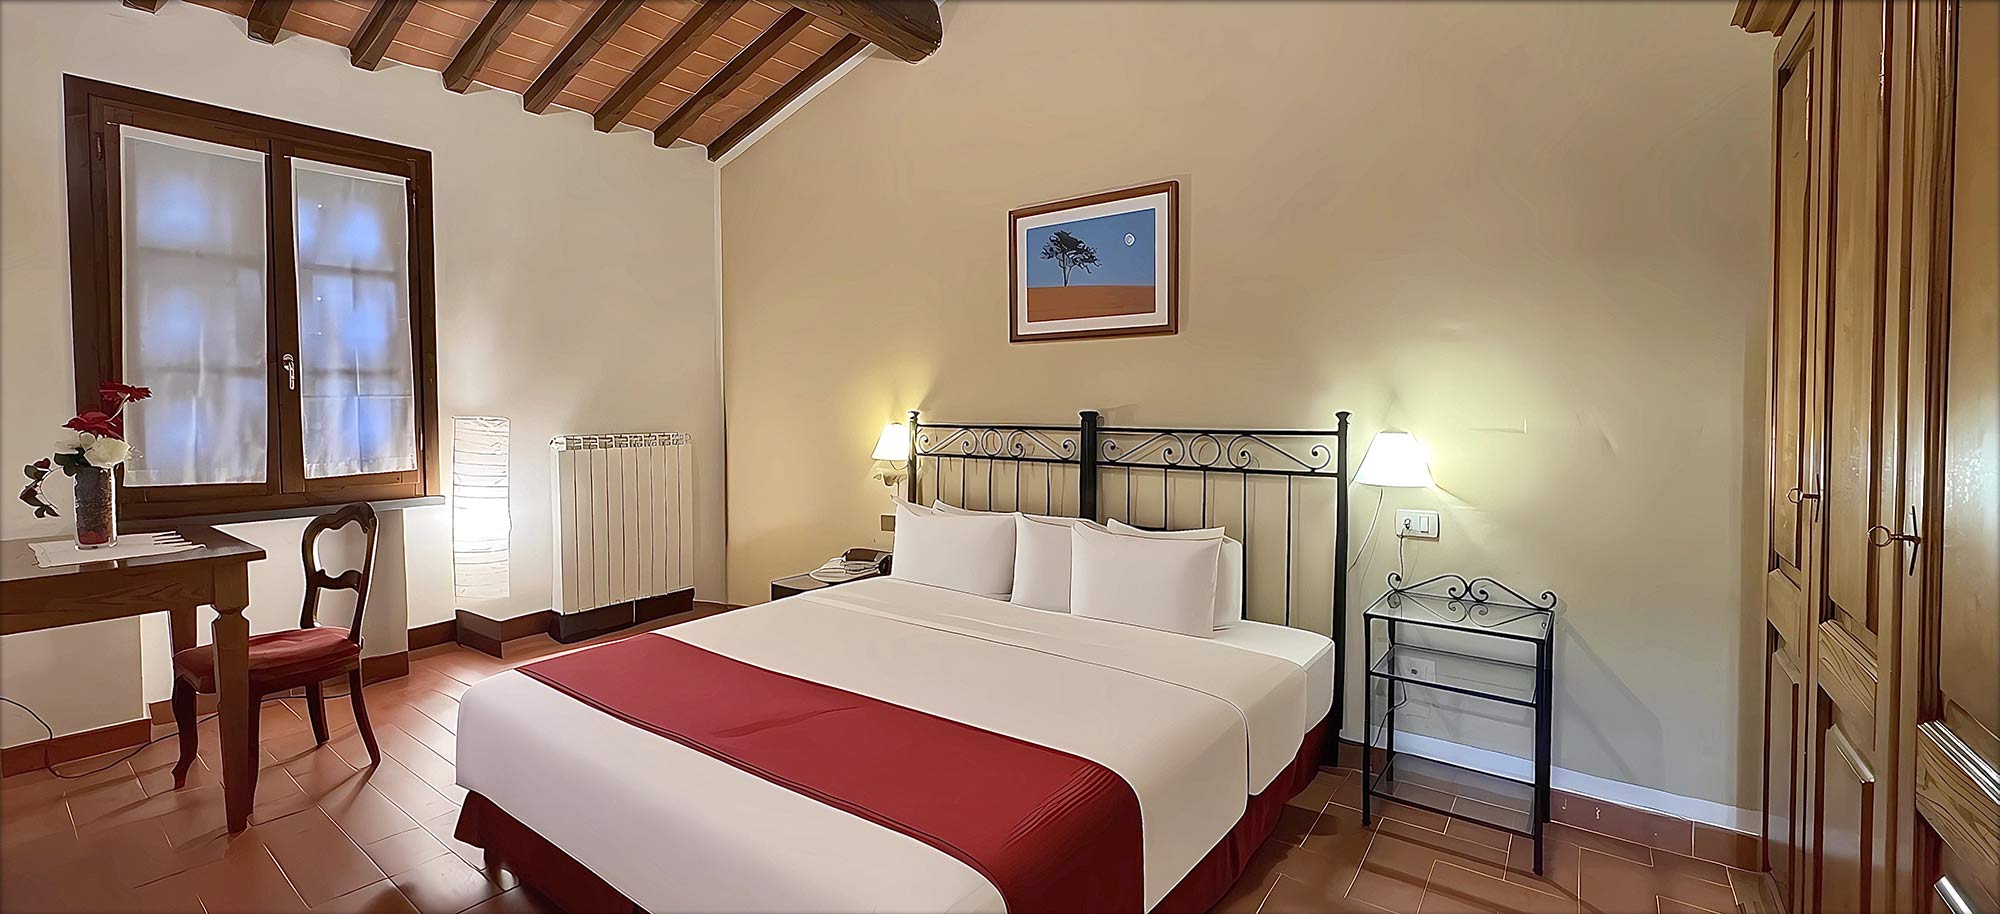 Corte Tommasi - Holiday apartments in Tuscany - 207 - Tuscany apartment with swimming pool